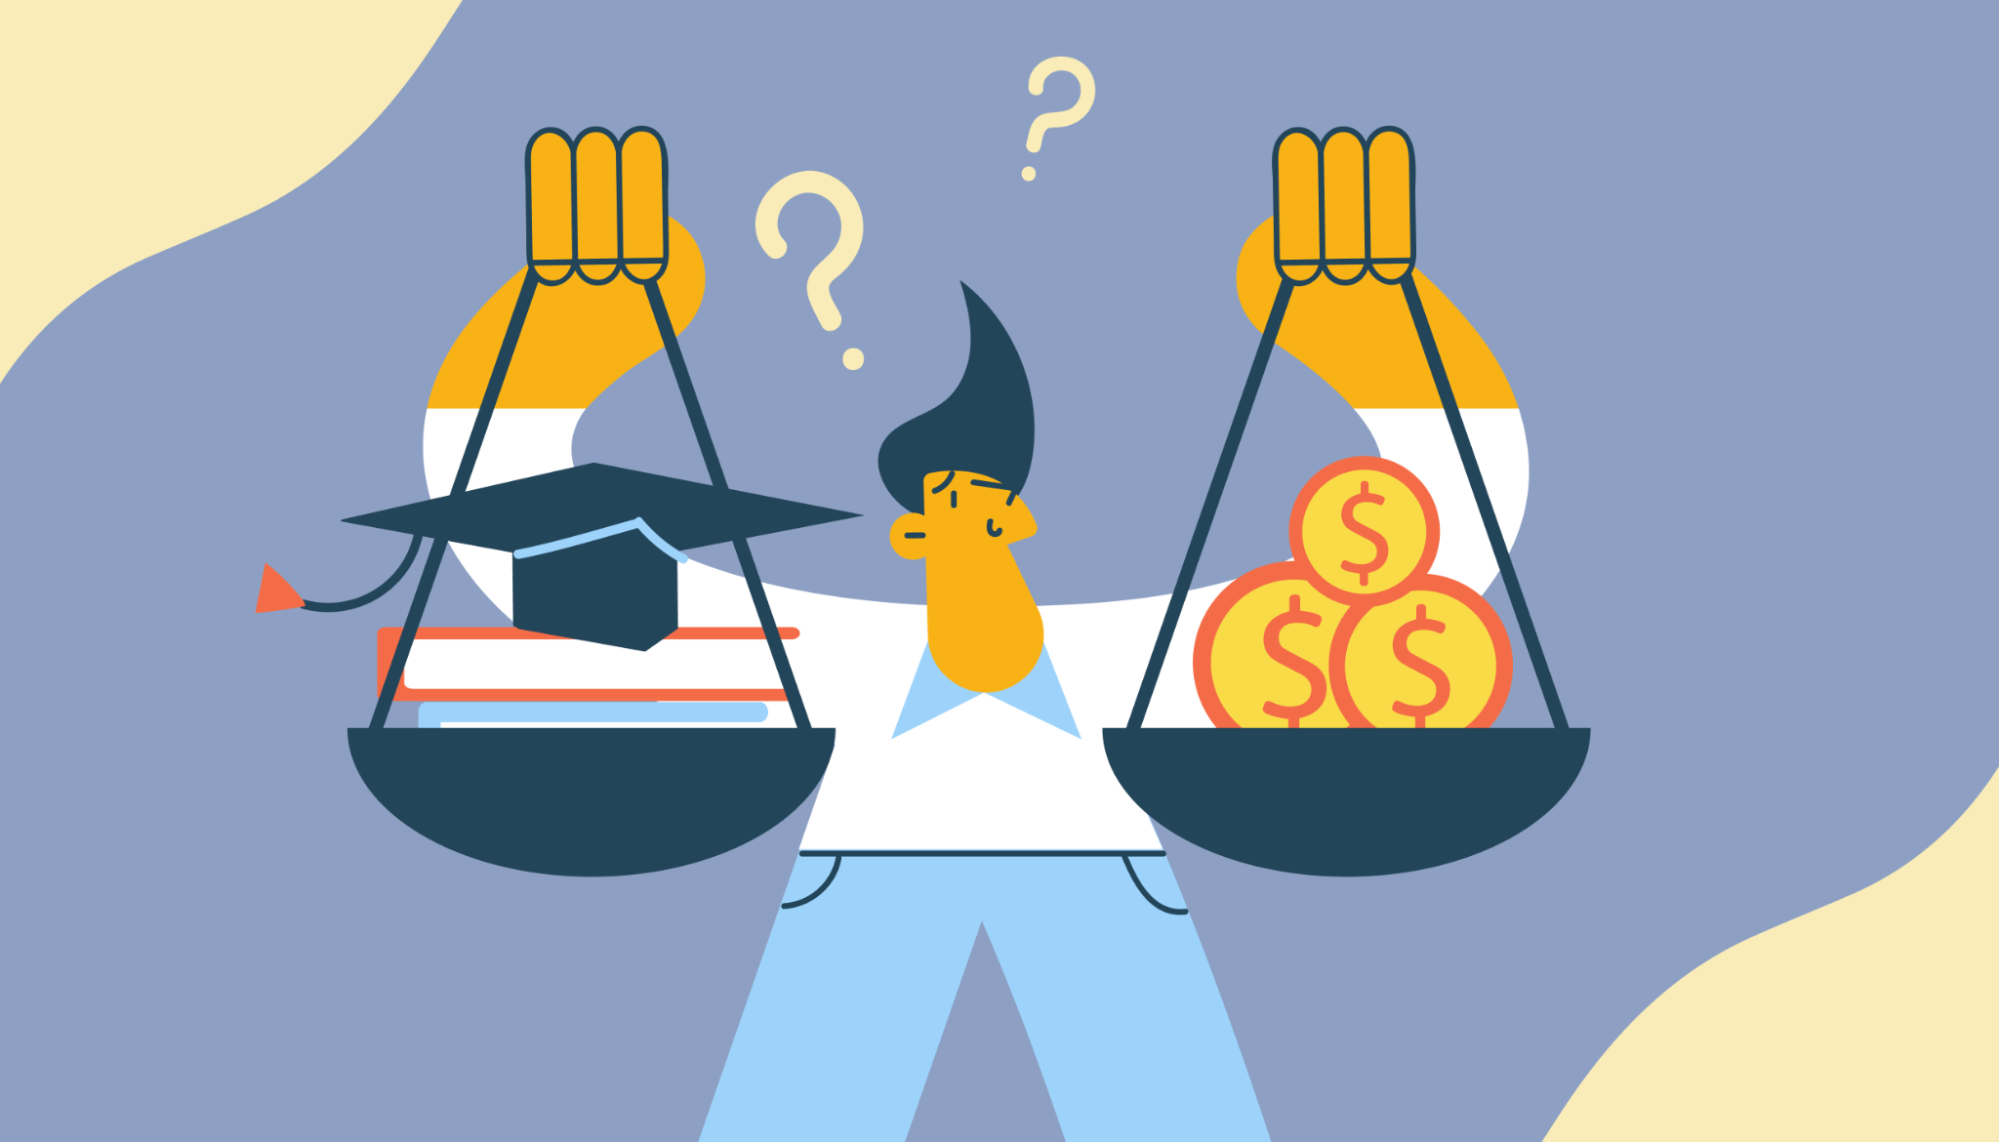 Make sure to evaluate the pros and cons of student loans before borrowing.
